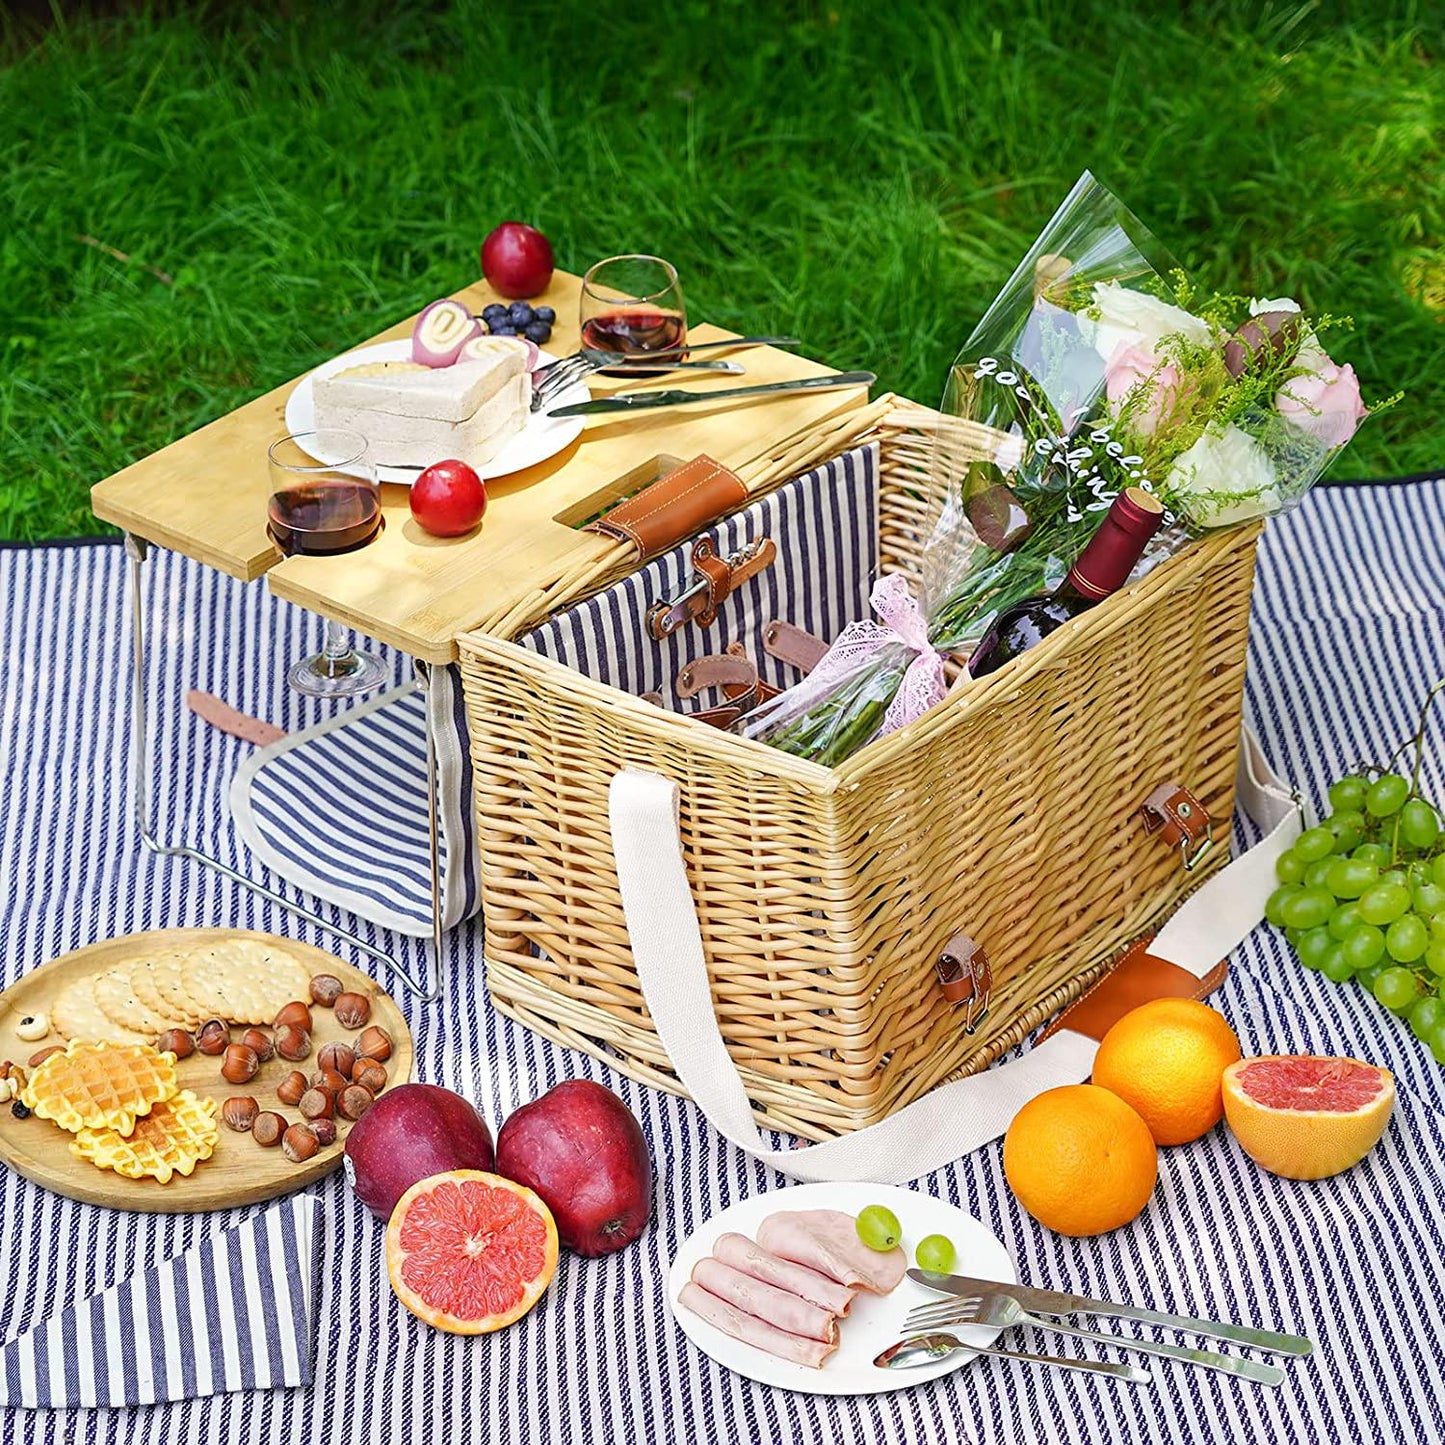 Wicker Picnic Basket for 2 with Detachable Table, Elasticated Wine Holder, Shoulder Carrying Willow Picnic Hamper Set with Premium Tableware and Blanket